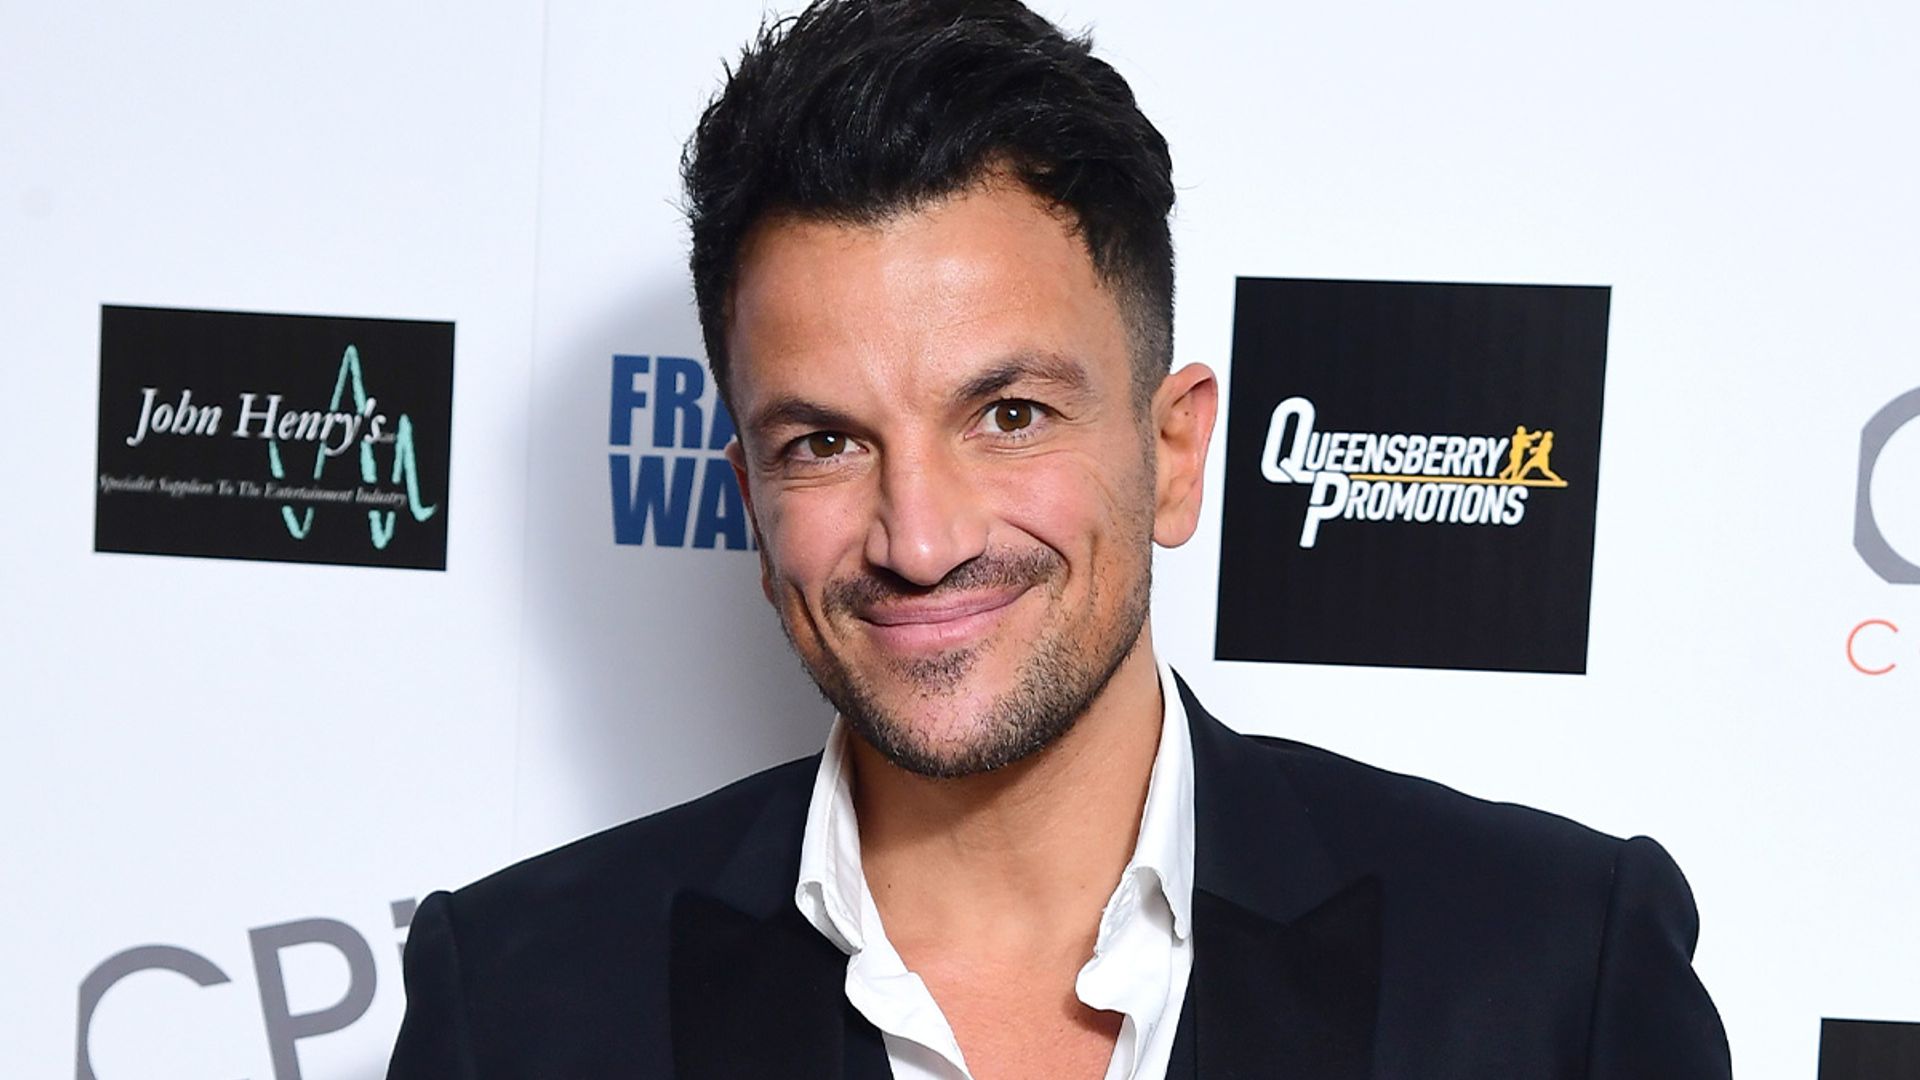 Peter Andre moves fans to tears with sweet wedding video | HELLO!